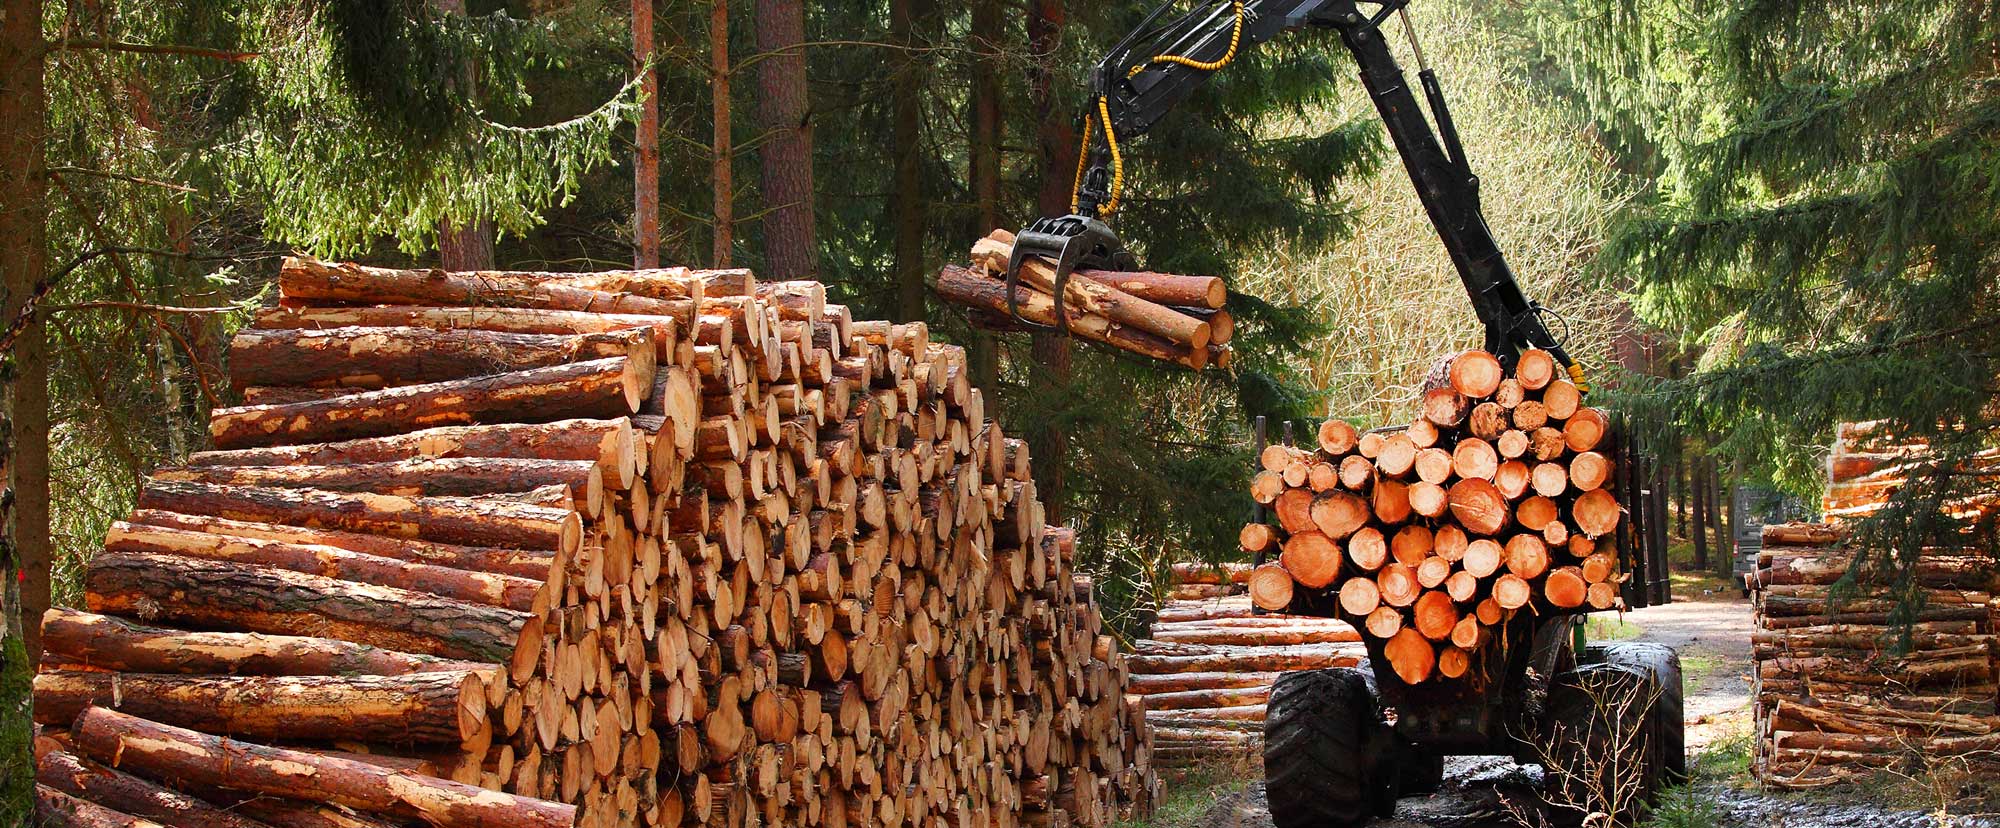 Illegal logging and deforestation: money does grow on trees